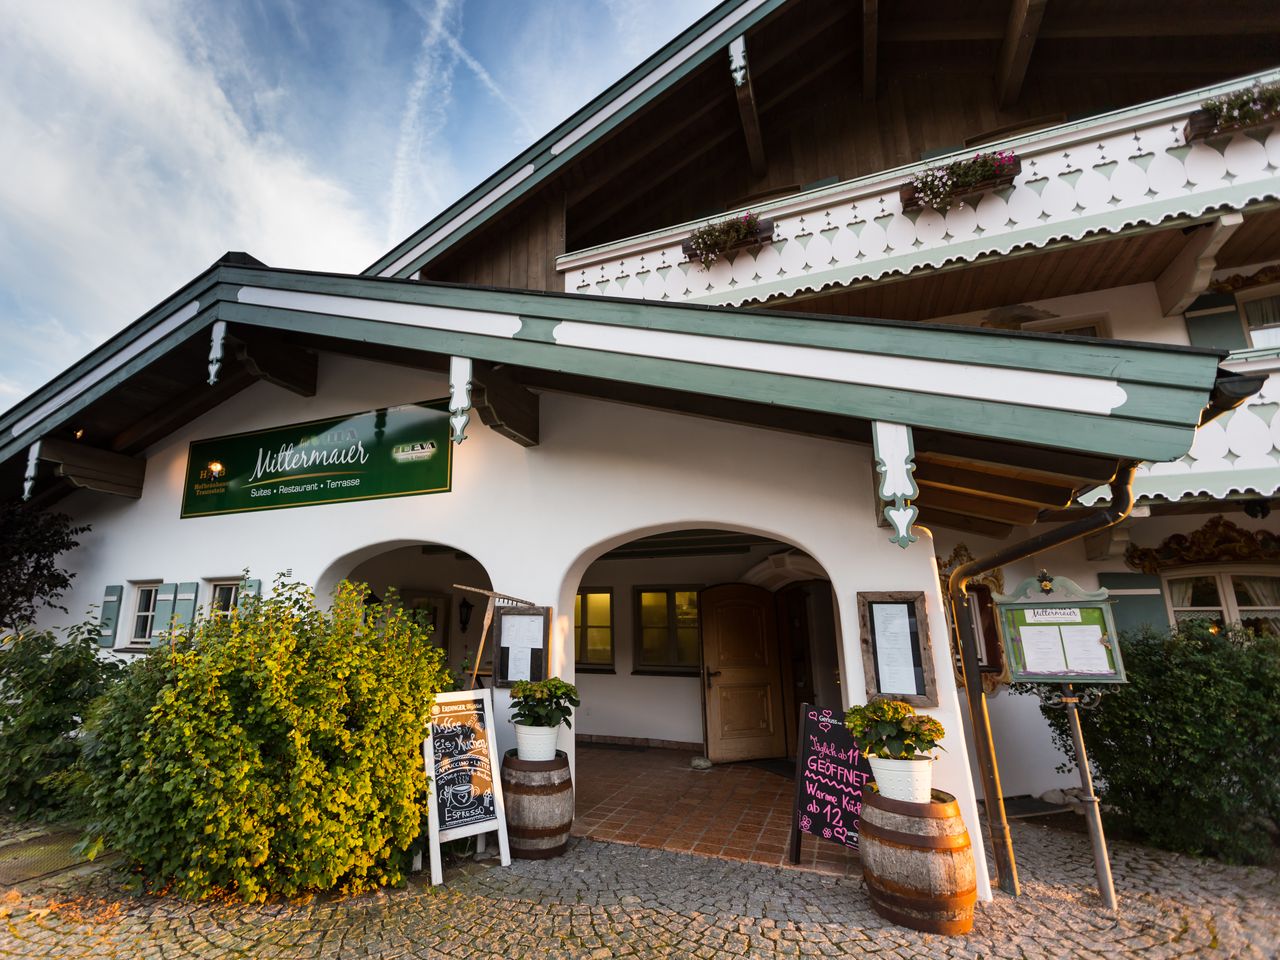 3 Tage Oberbayern - Entspannen in Natur & Therme